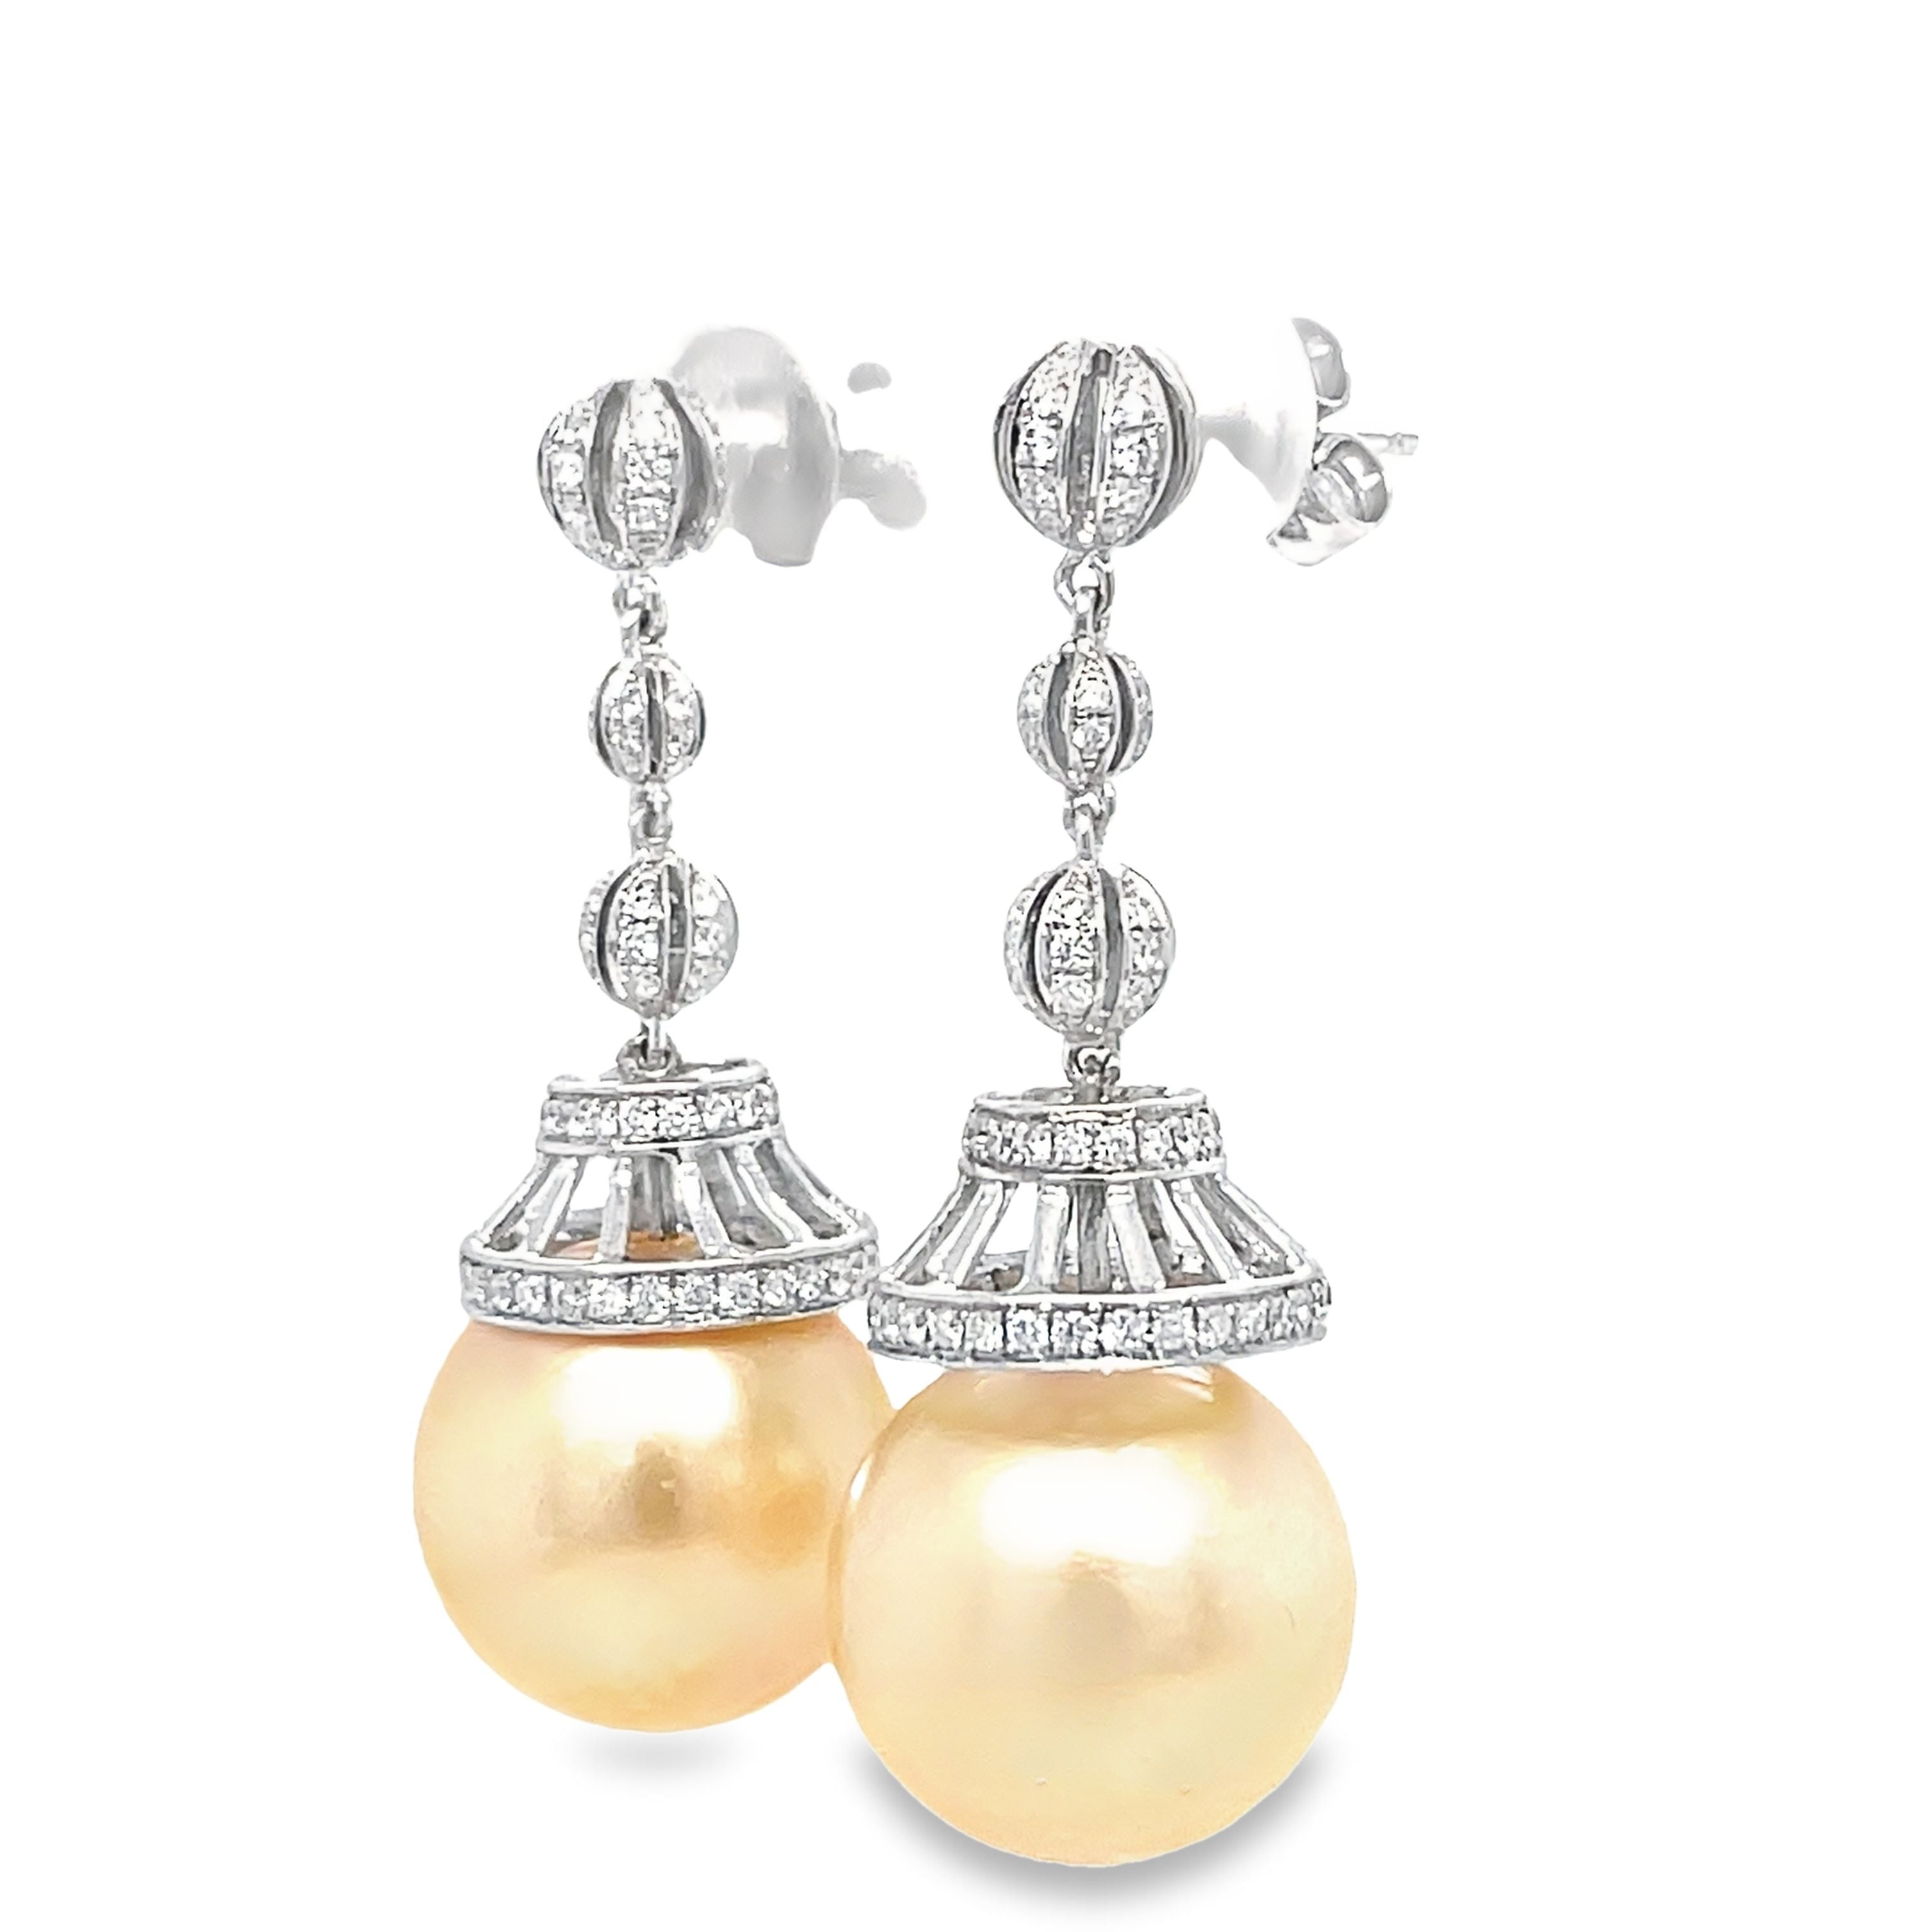 Add elegance and sophistication to your outfit with our South Seas and Diamond Drop Earrings. Featuring 14.00 mm South Seas pearls, 18k white gold, and 0.98 cts round diamonds, these earrings are the perfect statement piece to make you stand out. Elevate your style with these luxurious and timeless earrings!"